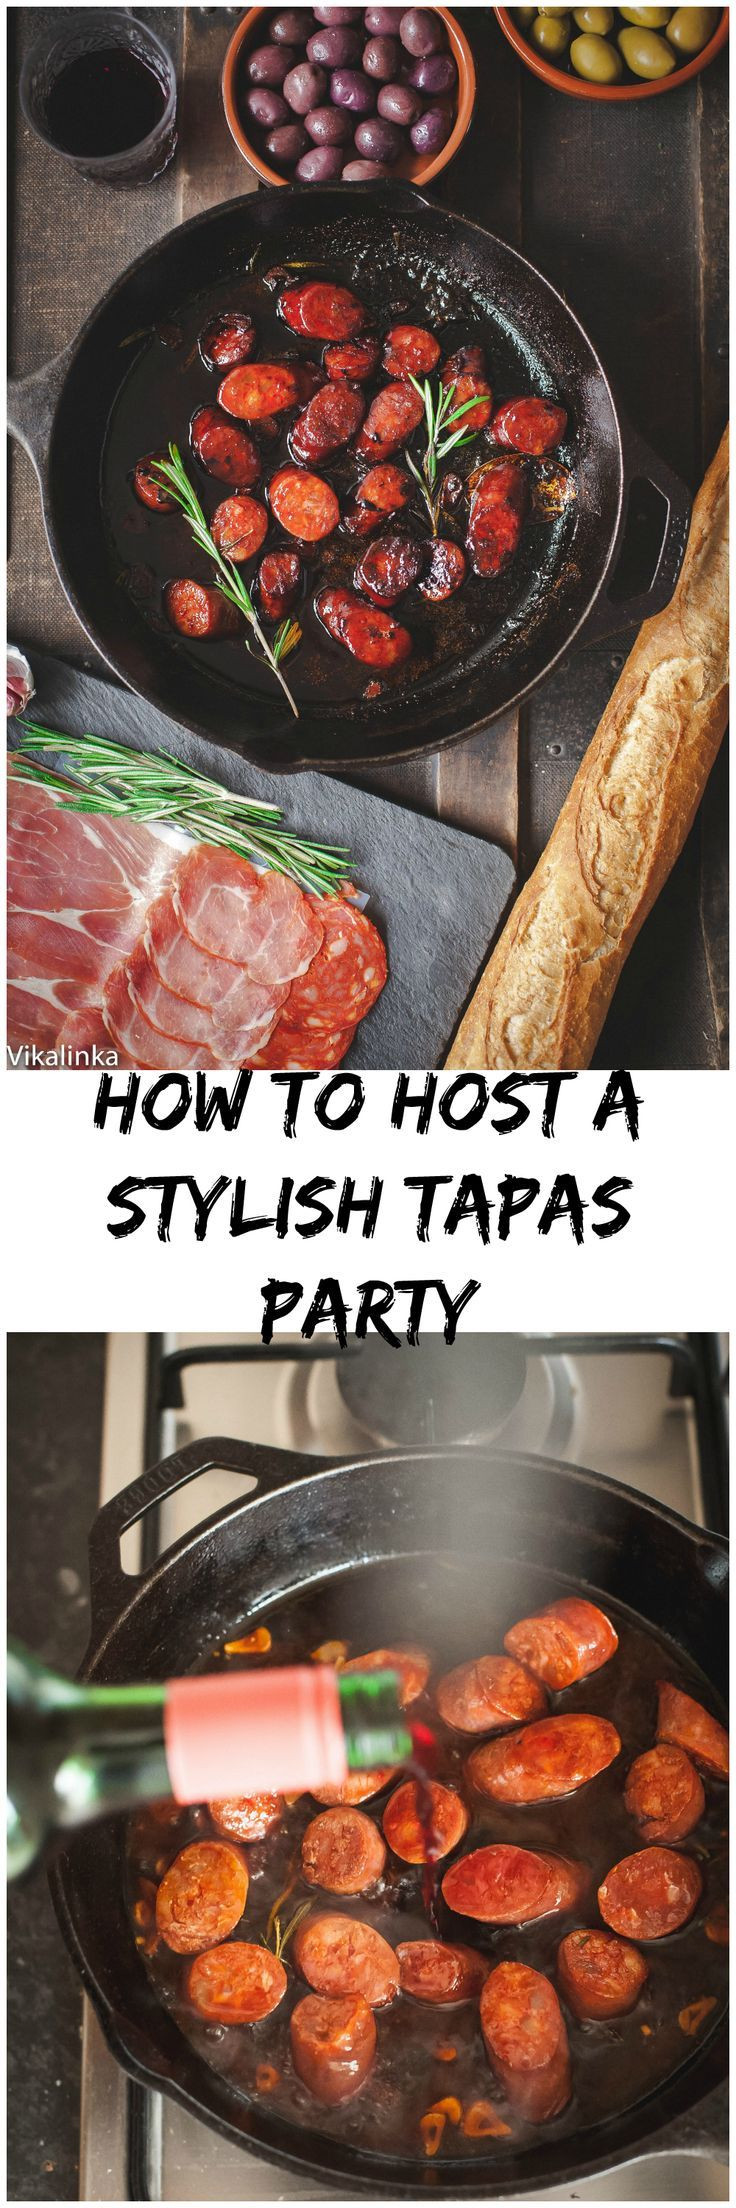 Spanish Food Ideas For A Party
 All you need to know to throw a successful wine and tapas